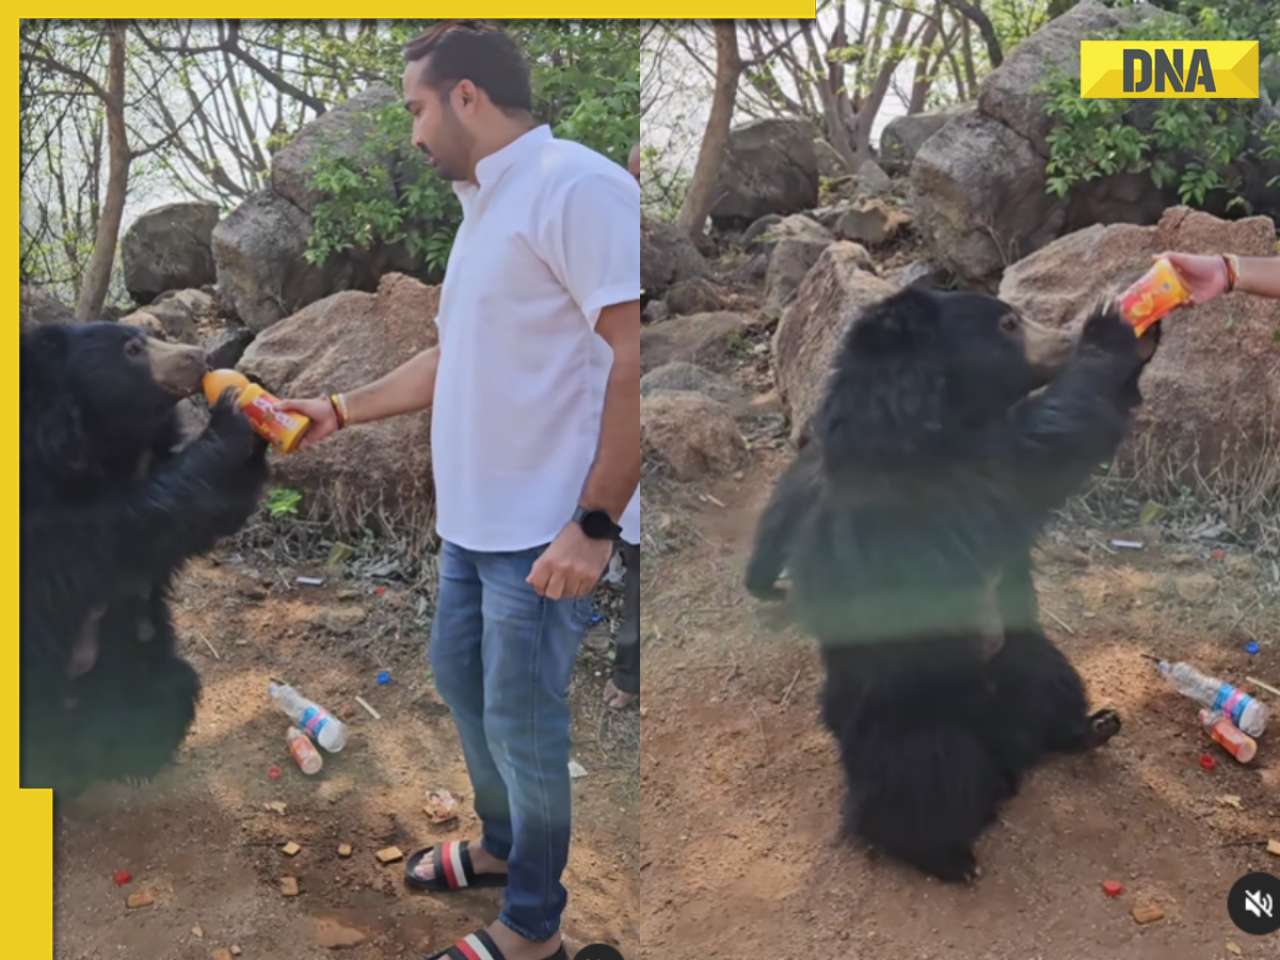 Man feeds cold drink to sloth bear, viral video makes internet angry